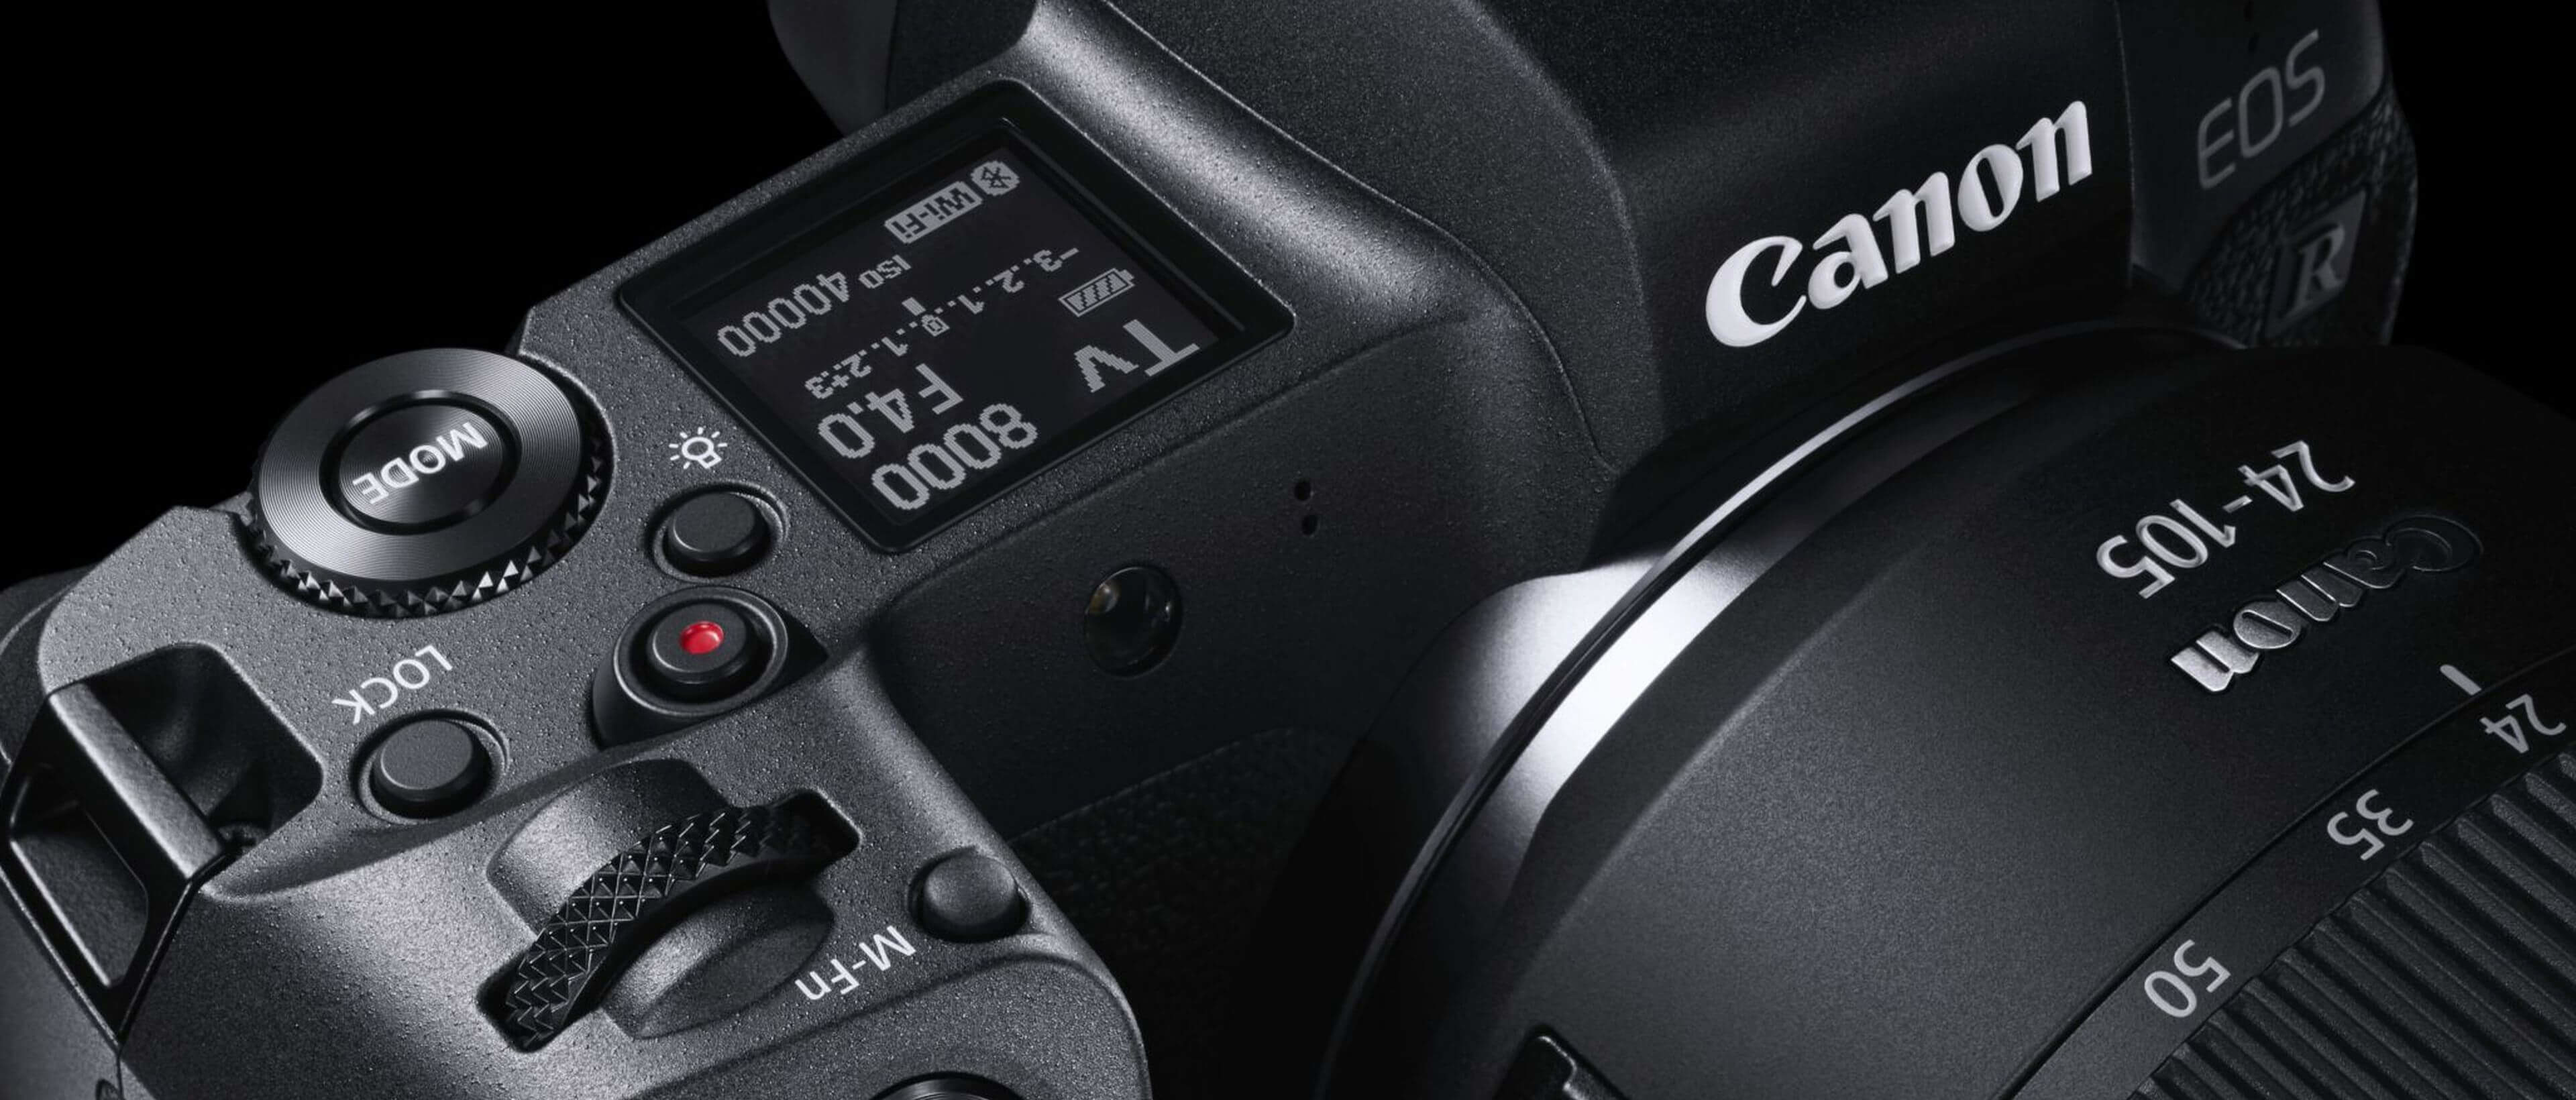 Preview Image: Die neue Canon EOS R – hands on